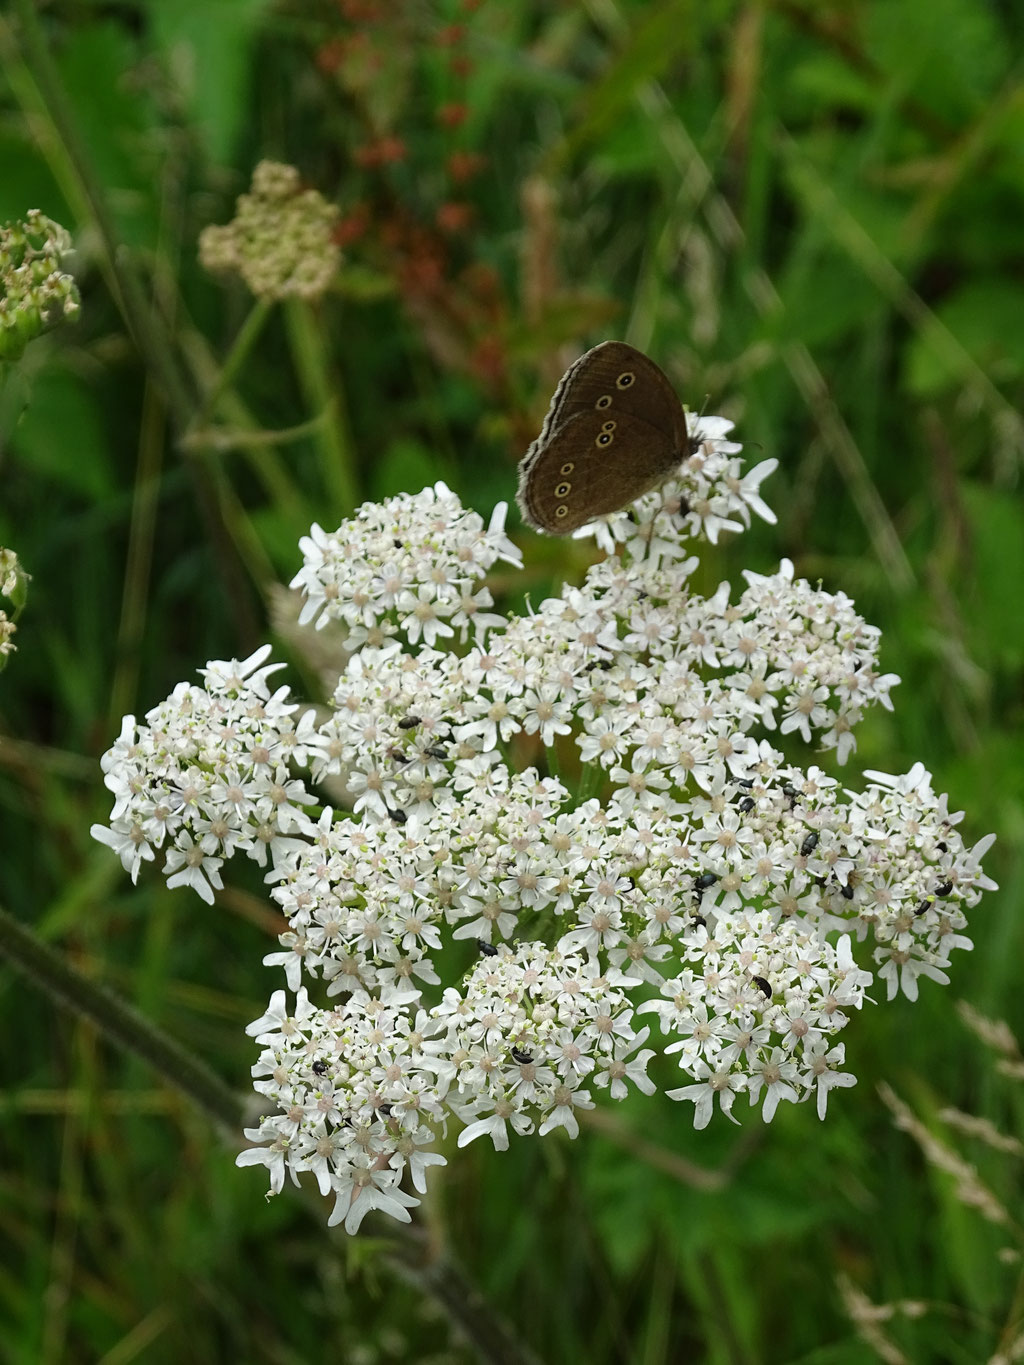 Meadow Brown Butterfly on Cow Parsley (photo by Steve Self)